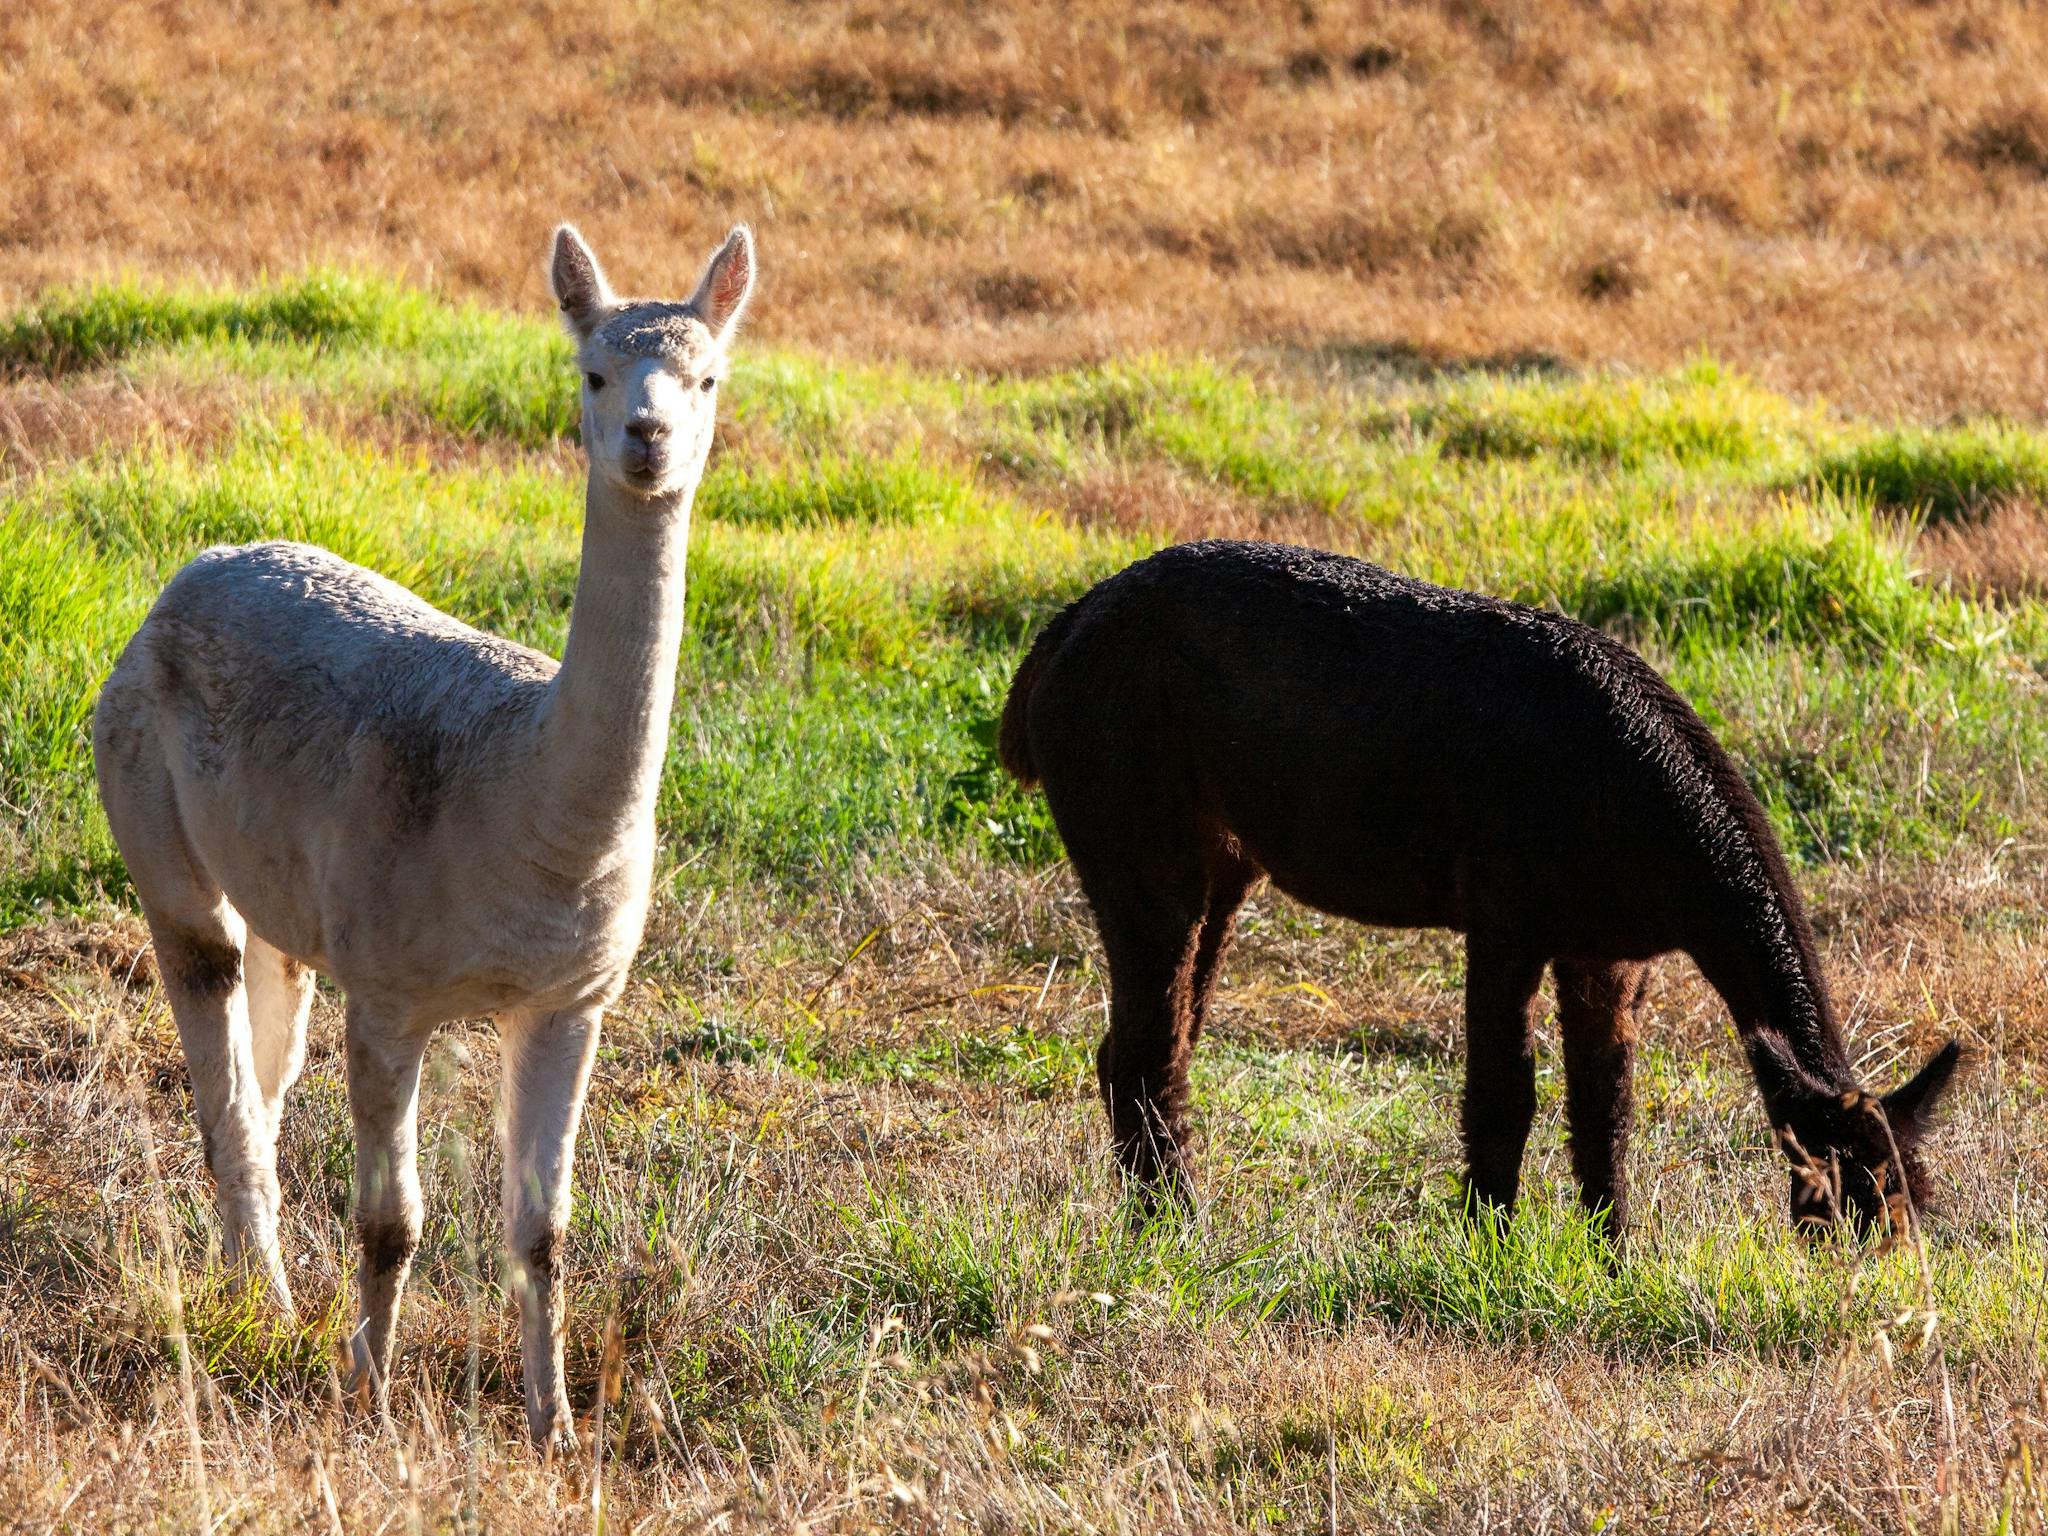 Depending on when you visit, our property may have alpacas, sheep, jersey cows